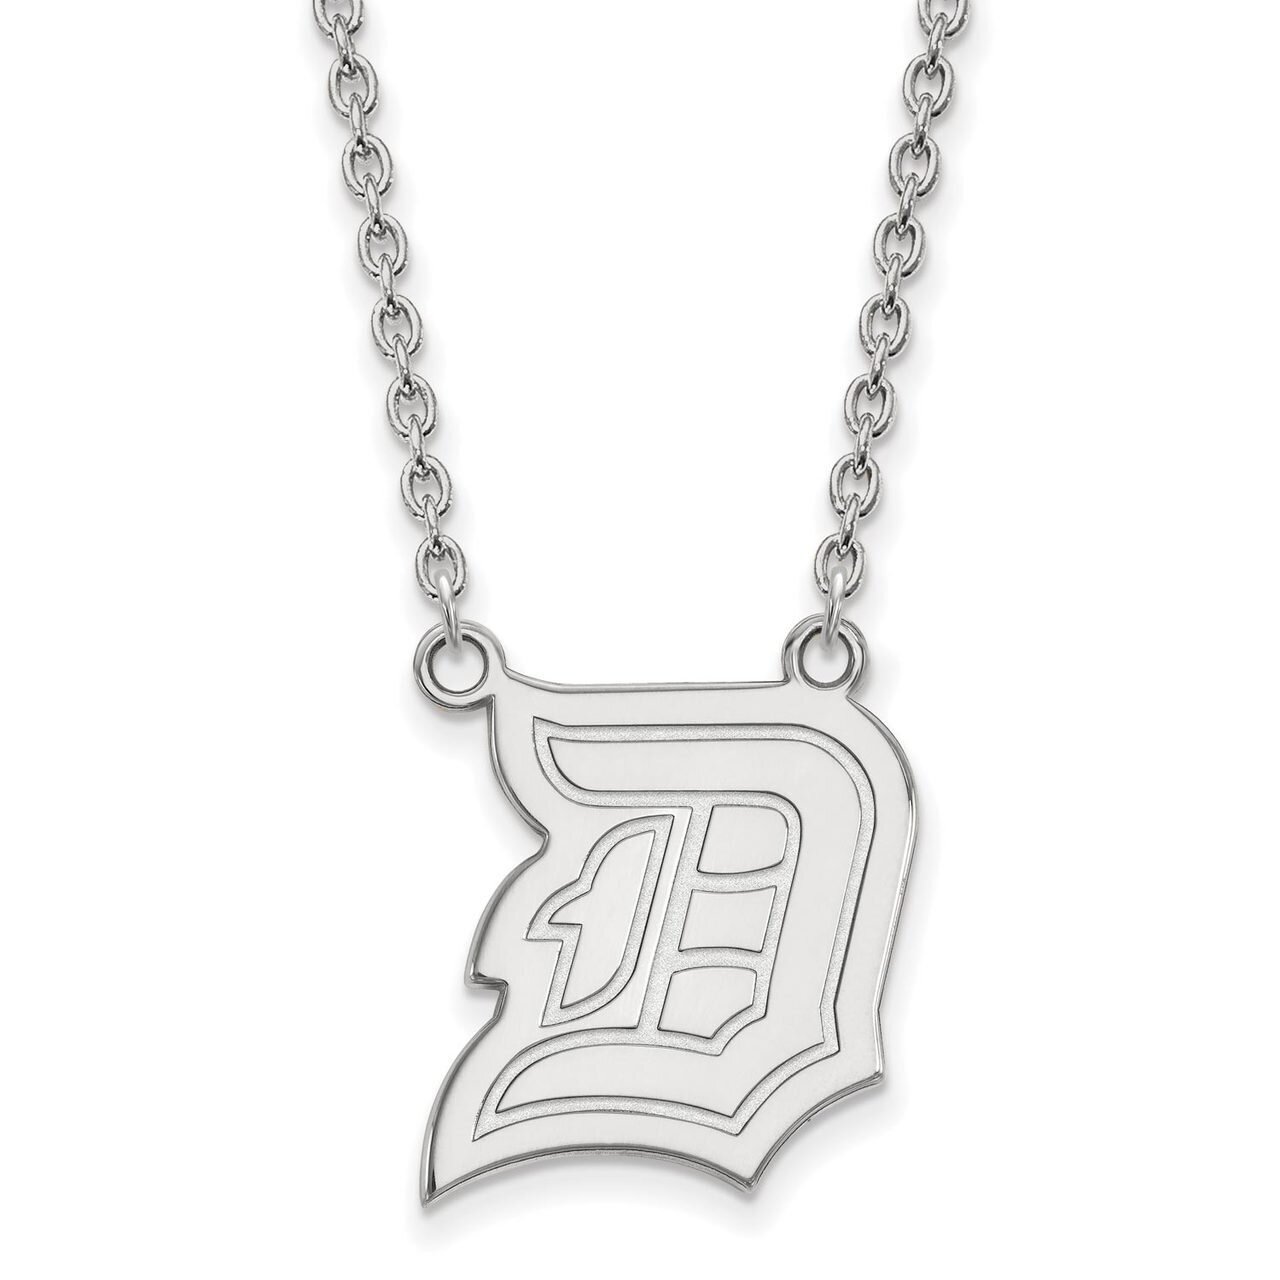 Duquesne University Large Pendant with Chain Necklace Sterling Silver SS007DUU-18